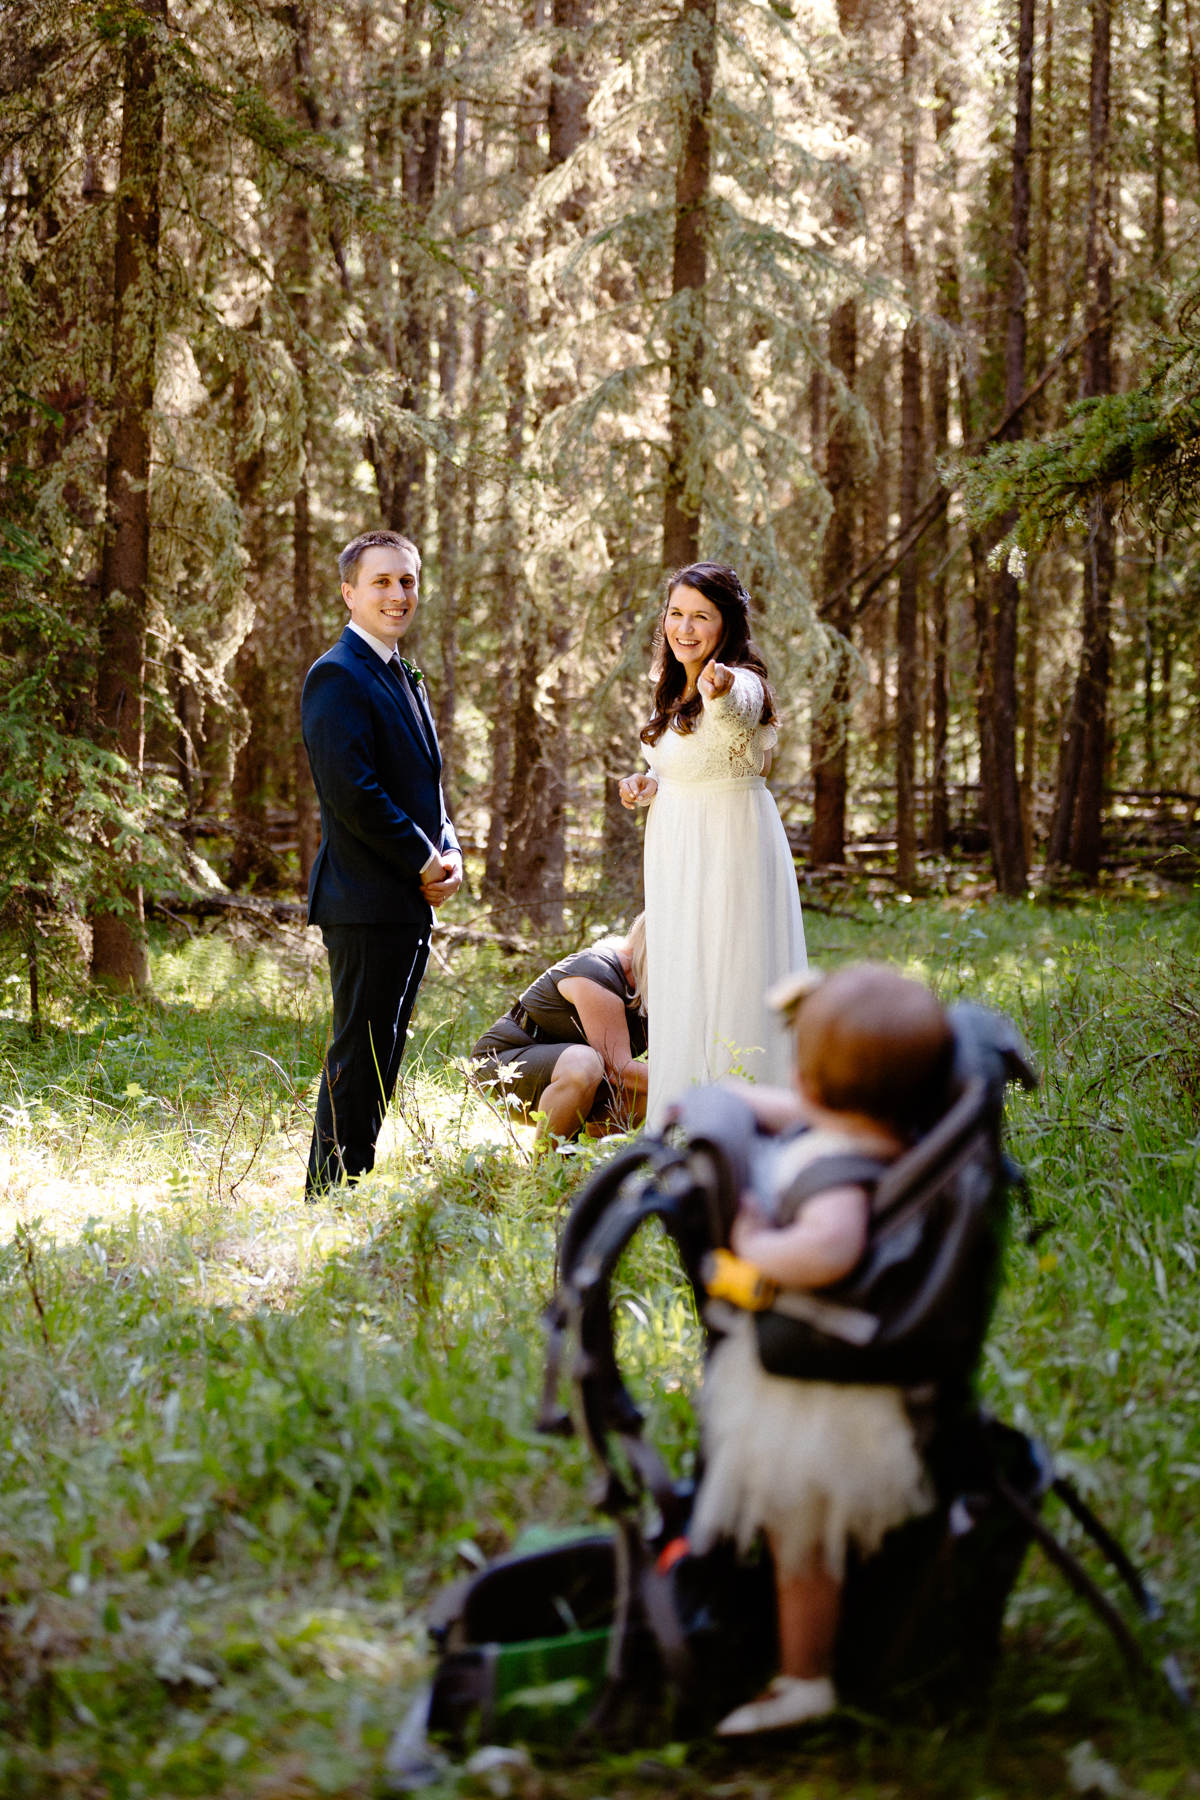 Vow Renewal Photography in Banff - Image 10